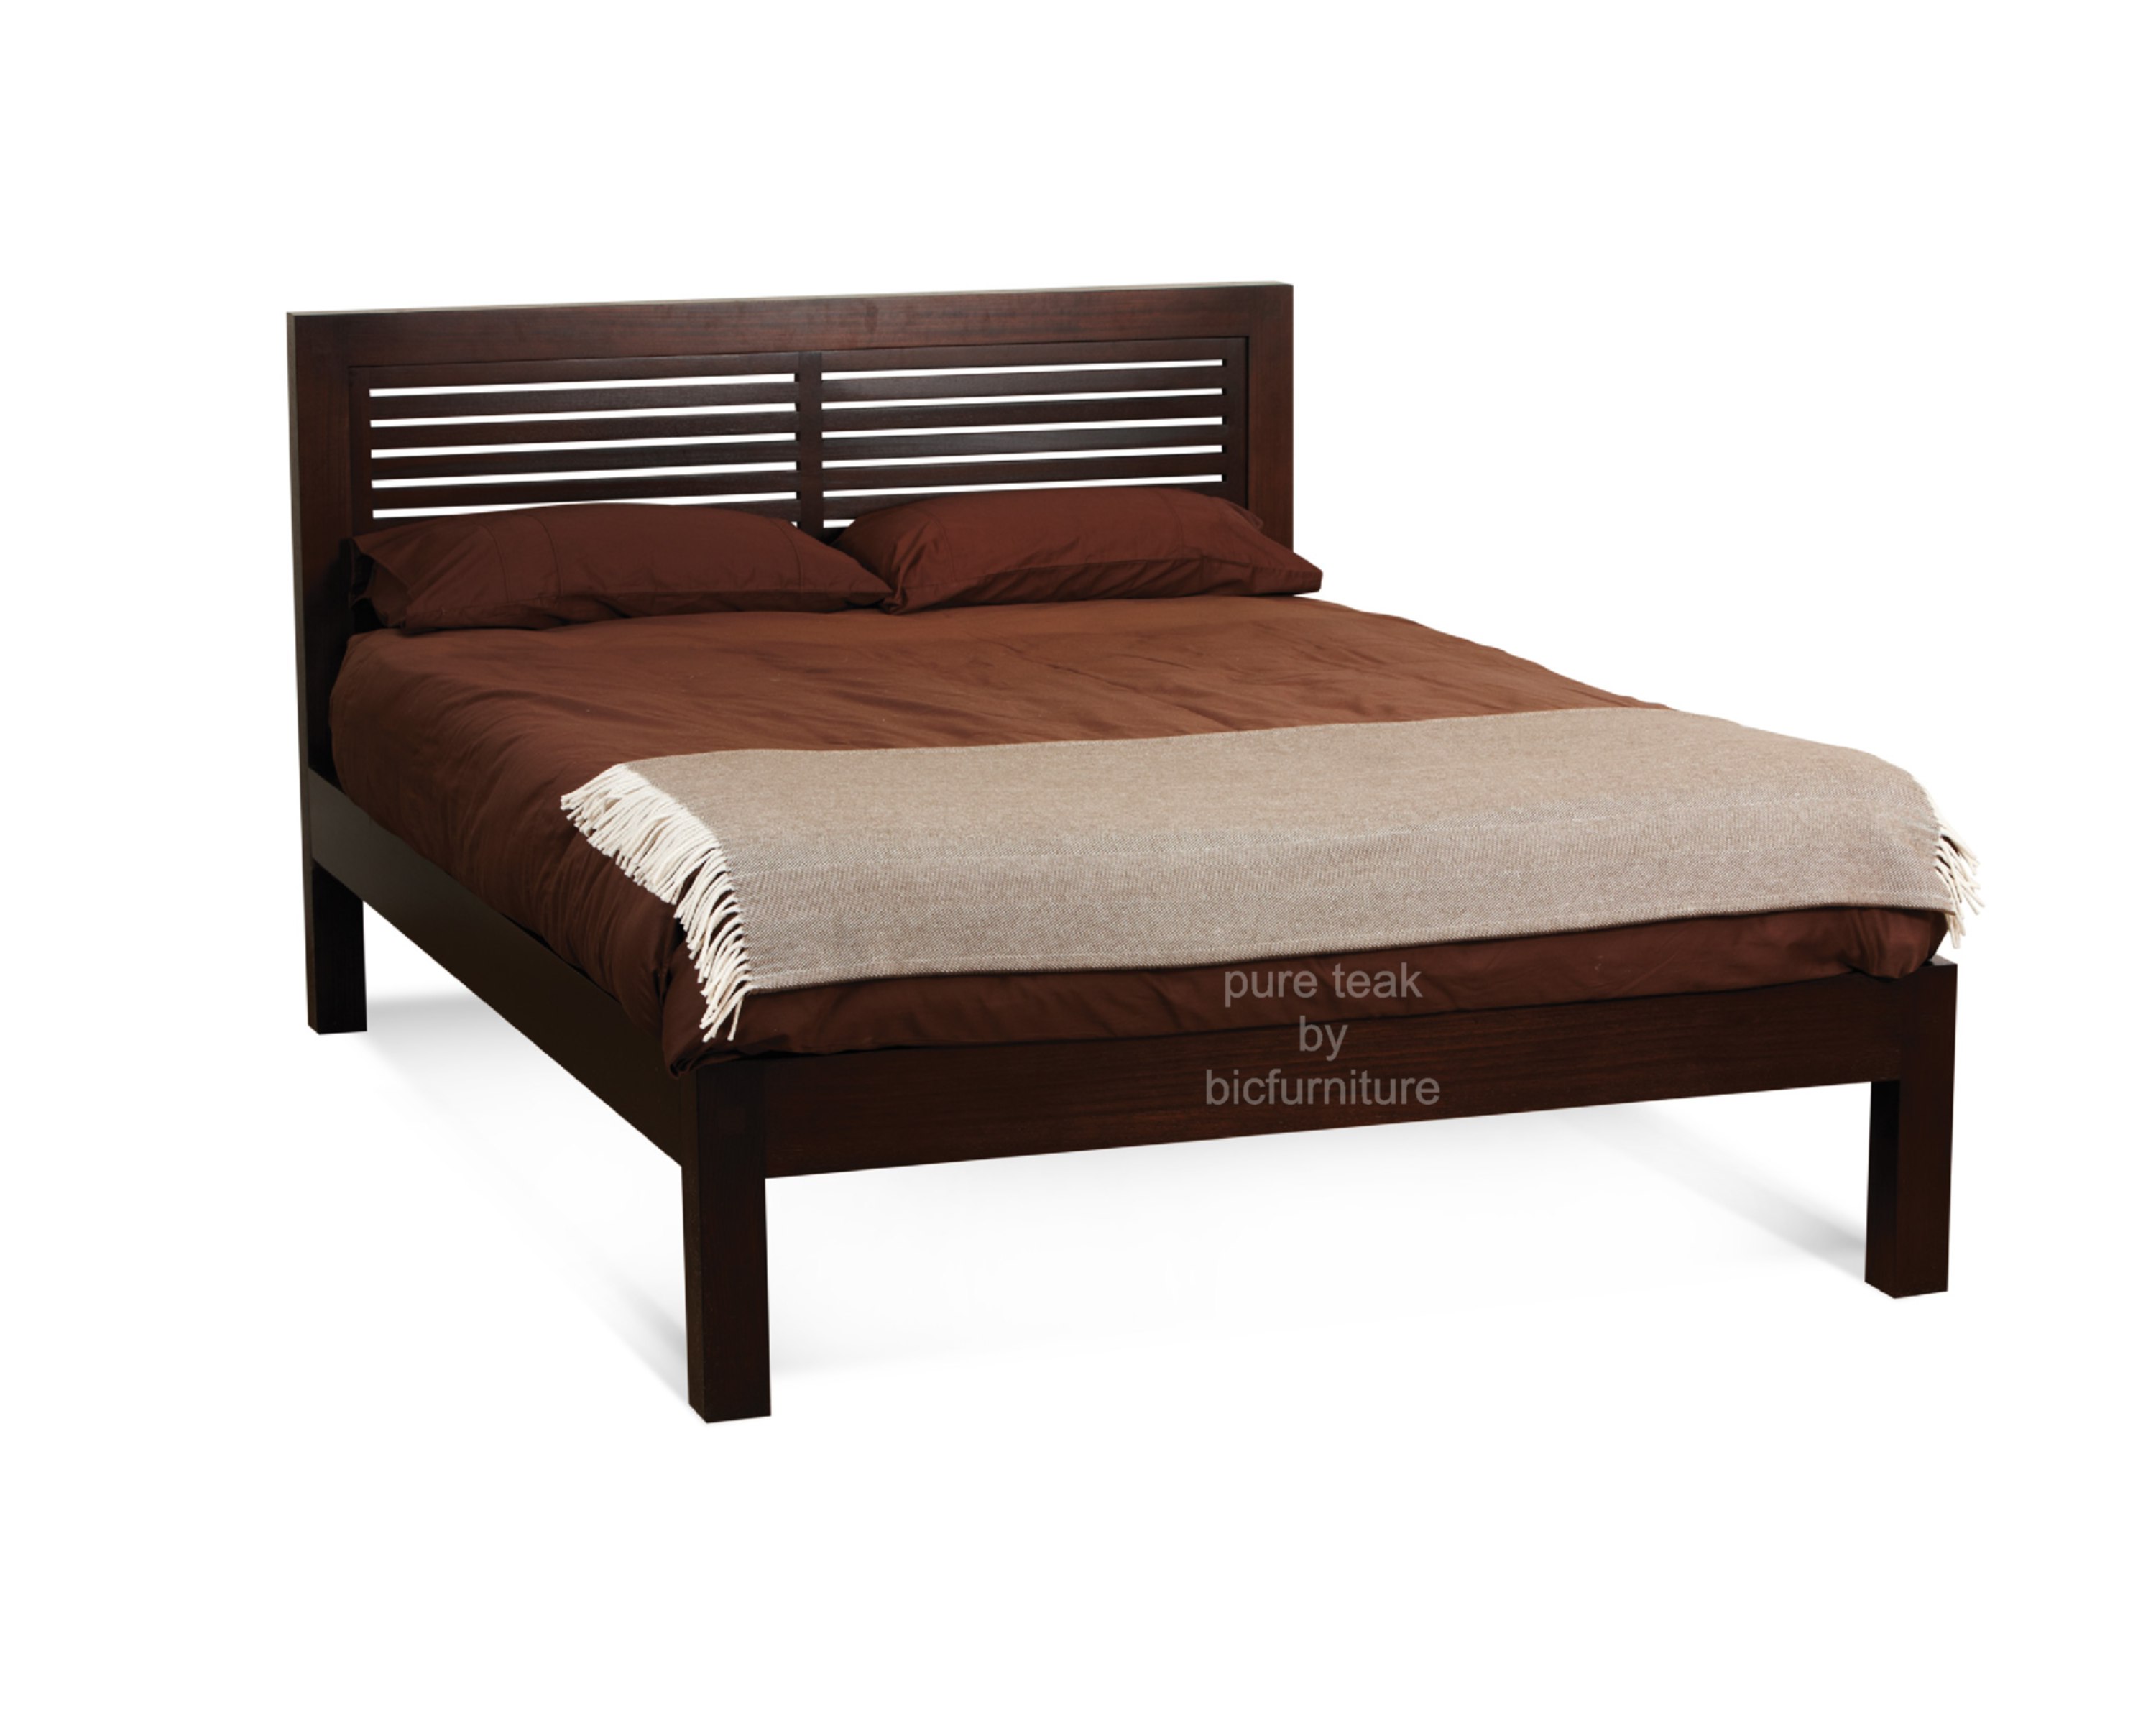 China Home Latest Double Simple Wooden Ash Bed Design Furniture Bedroom Solid Wood Beds China Solid Wood Ash Bed Nordic Solid Wood Bed